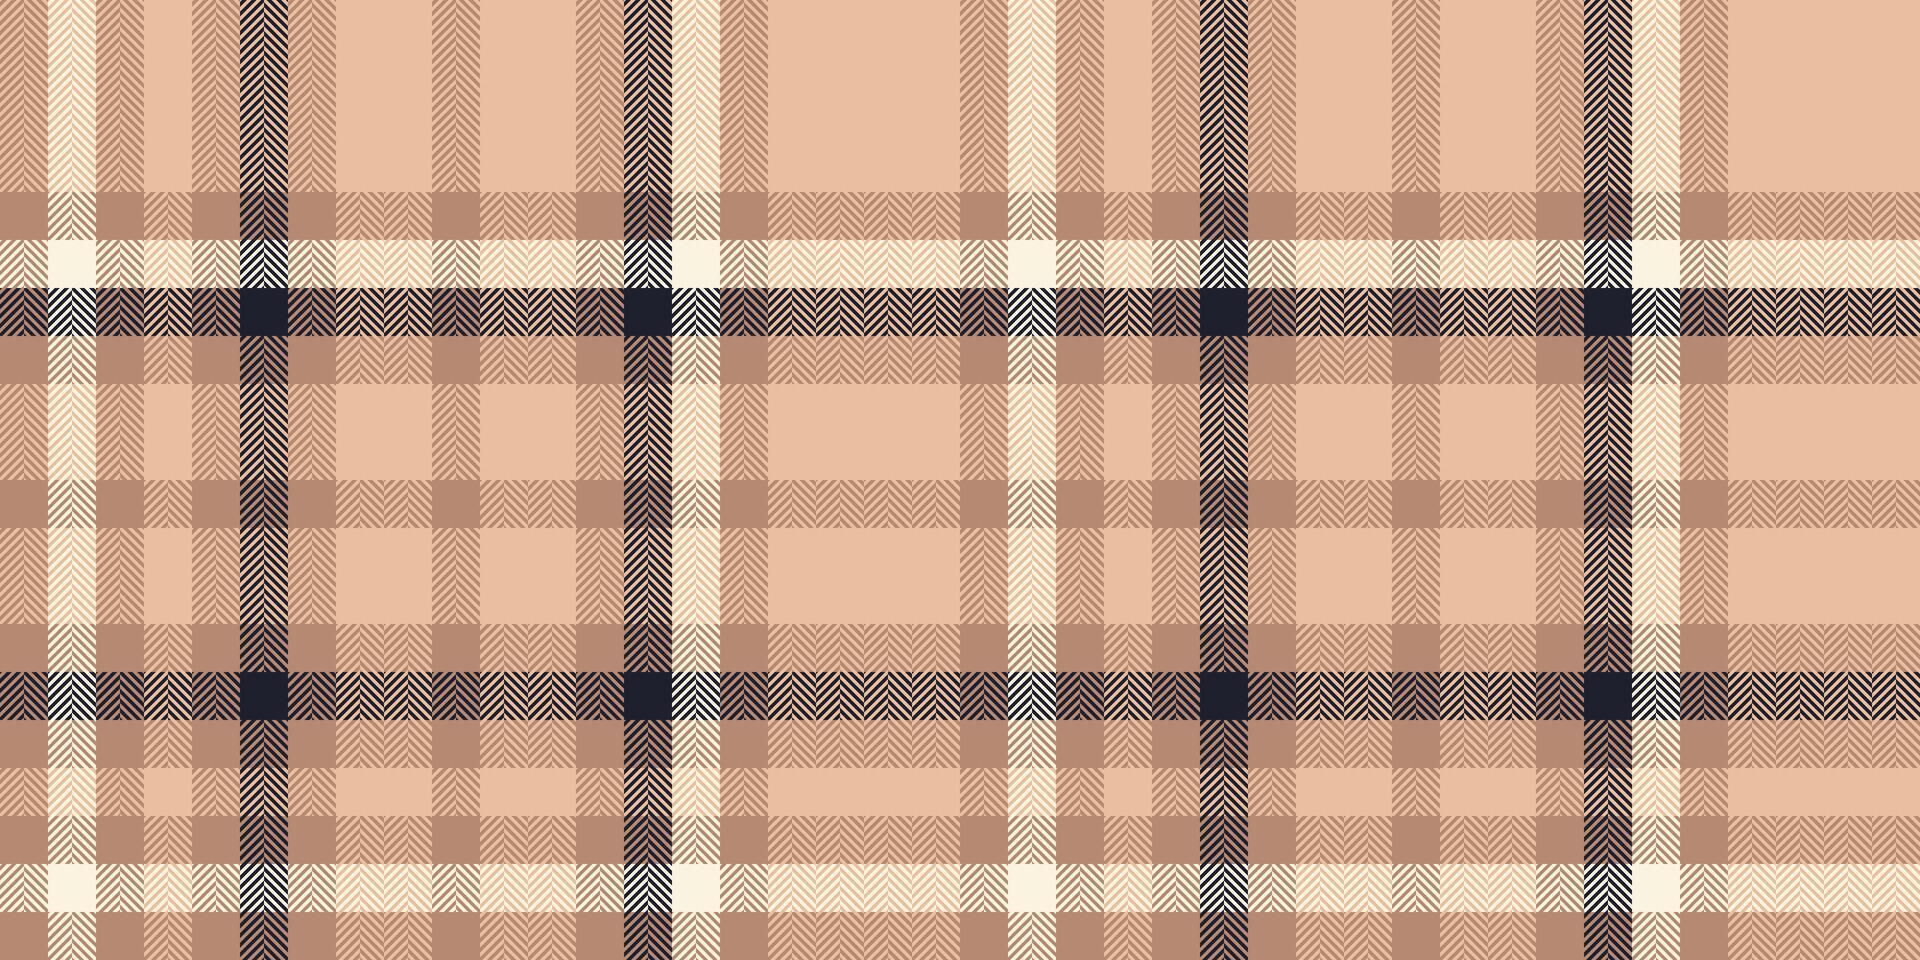 Event tartan plaid check, delicate background seamless. Pretty pattern textile fabric texture in orange and dark colors. vector